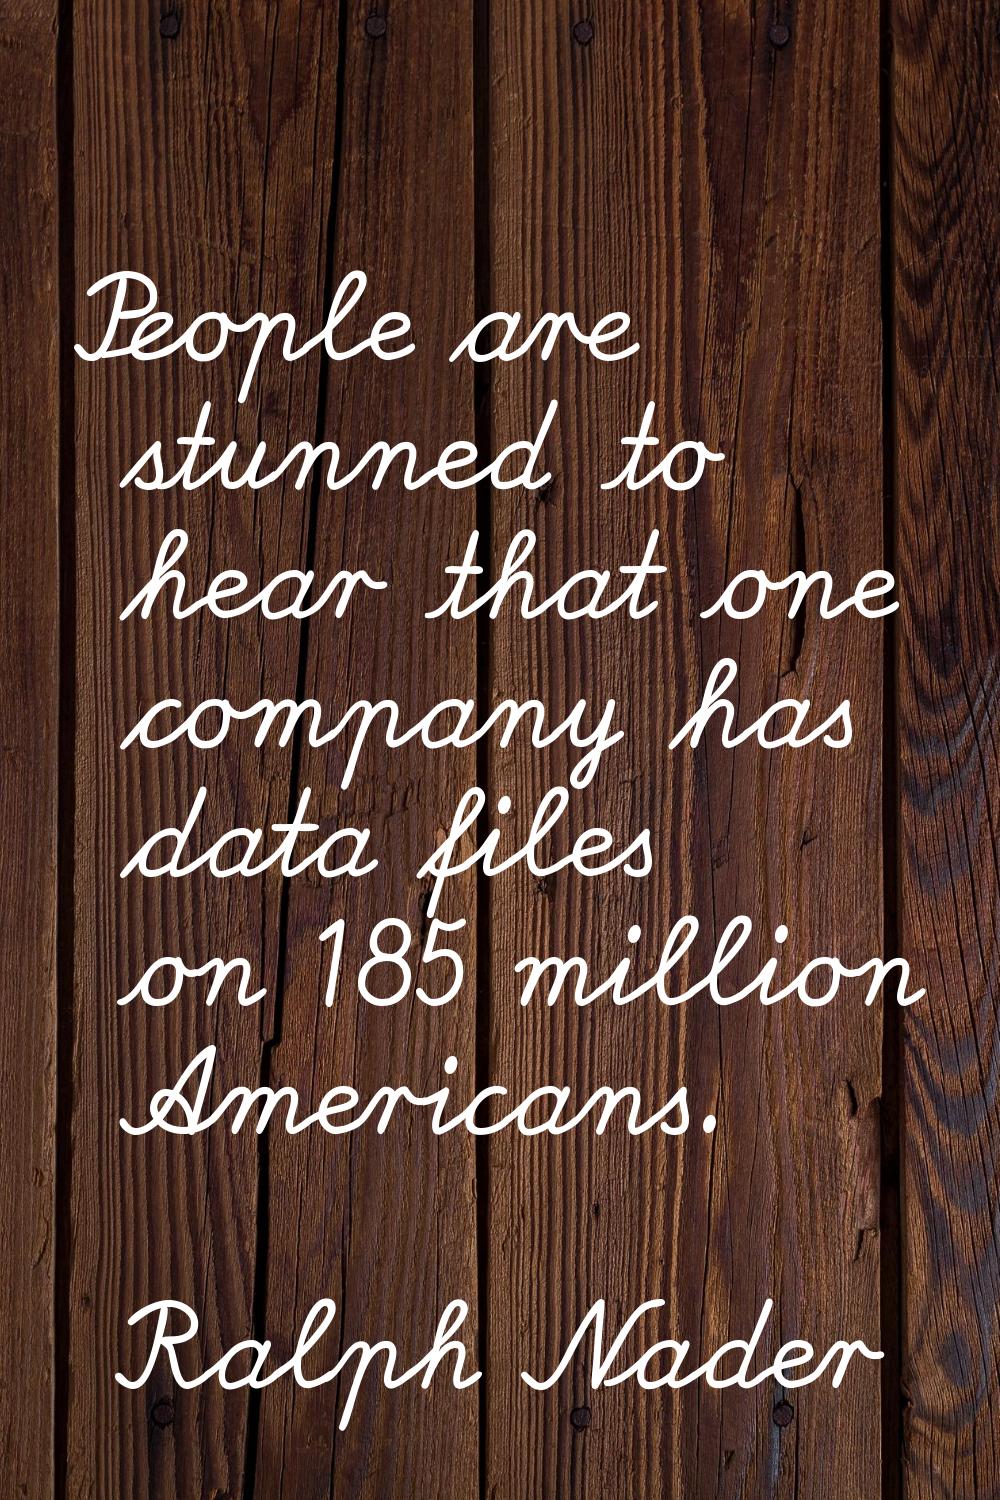 People are stunned to hear that one company has data files on 185 million Americans.